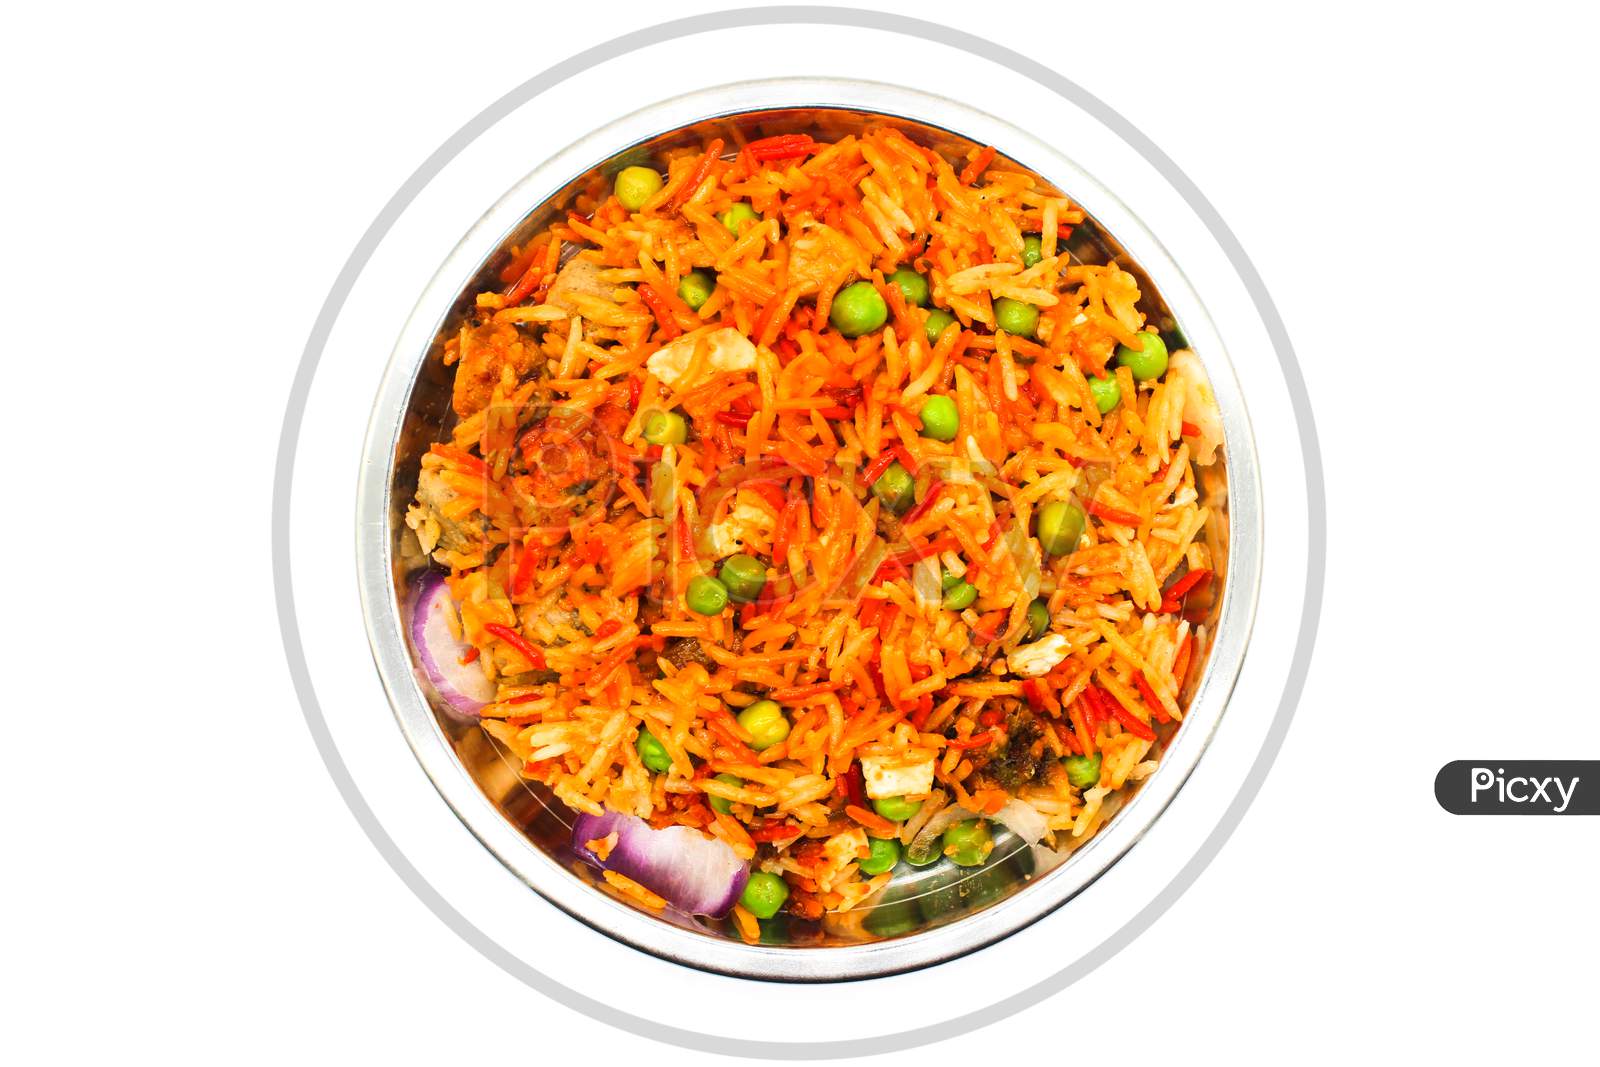 A Picture Of Veg Biryani Recipe With Selective Focus